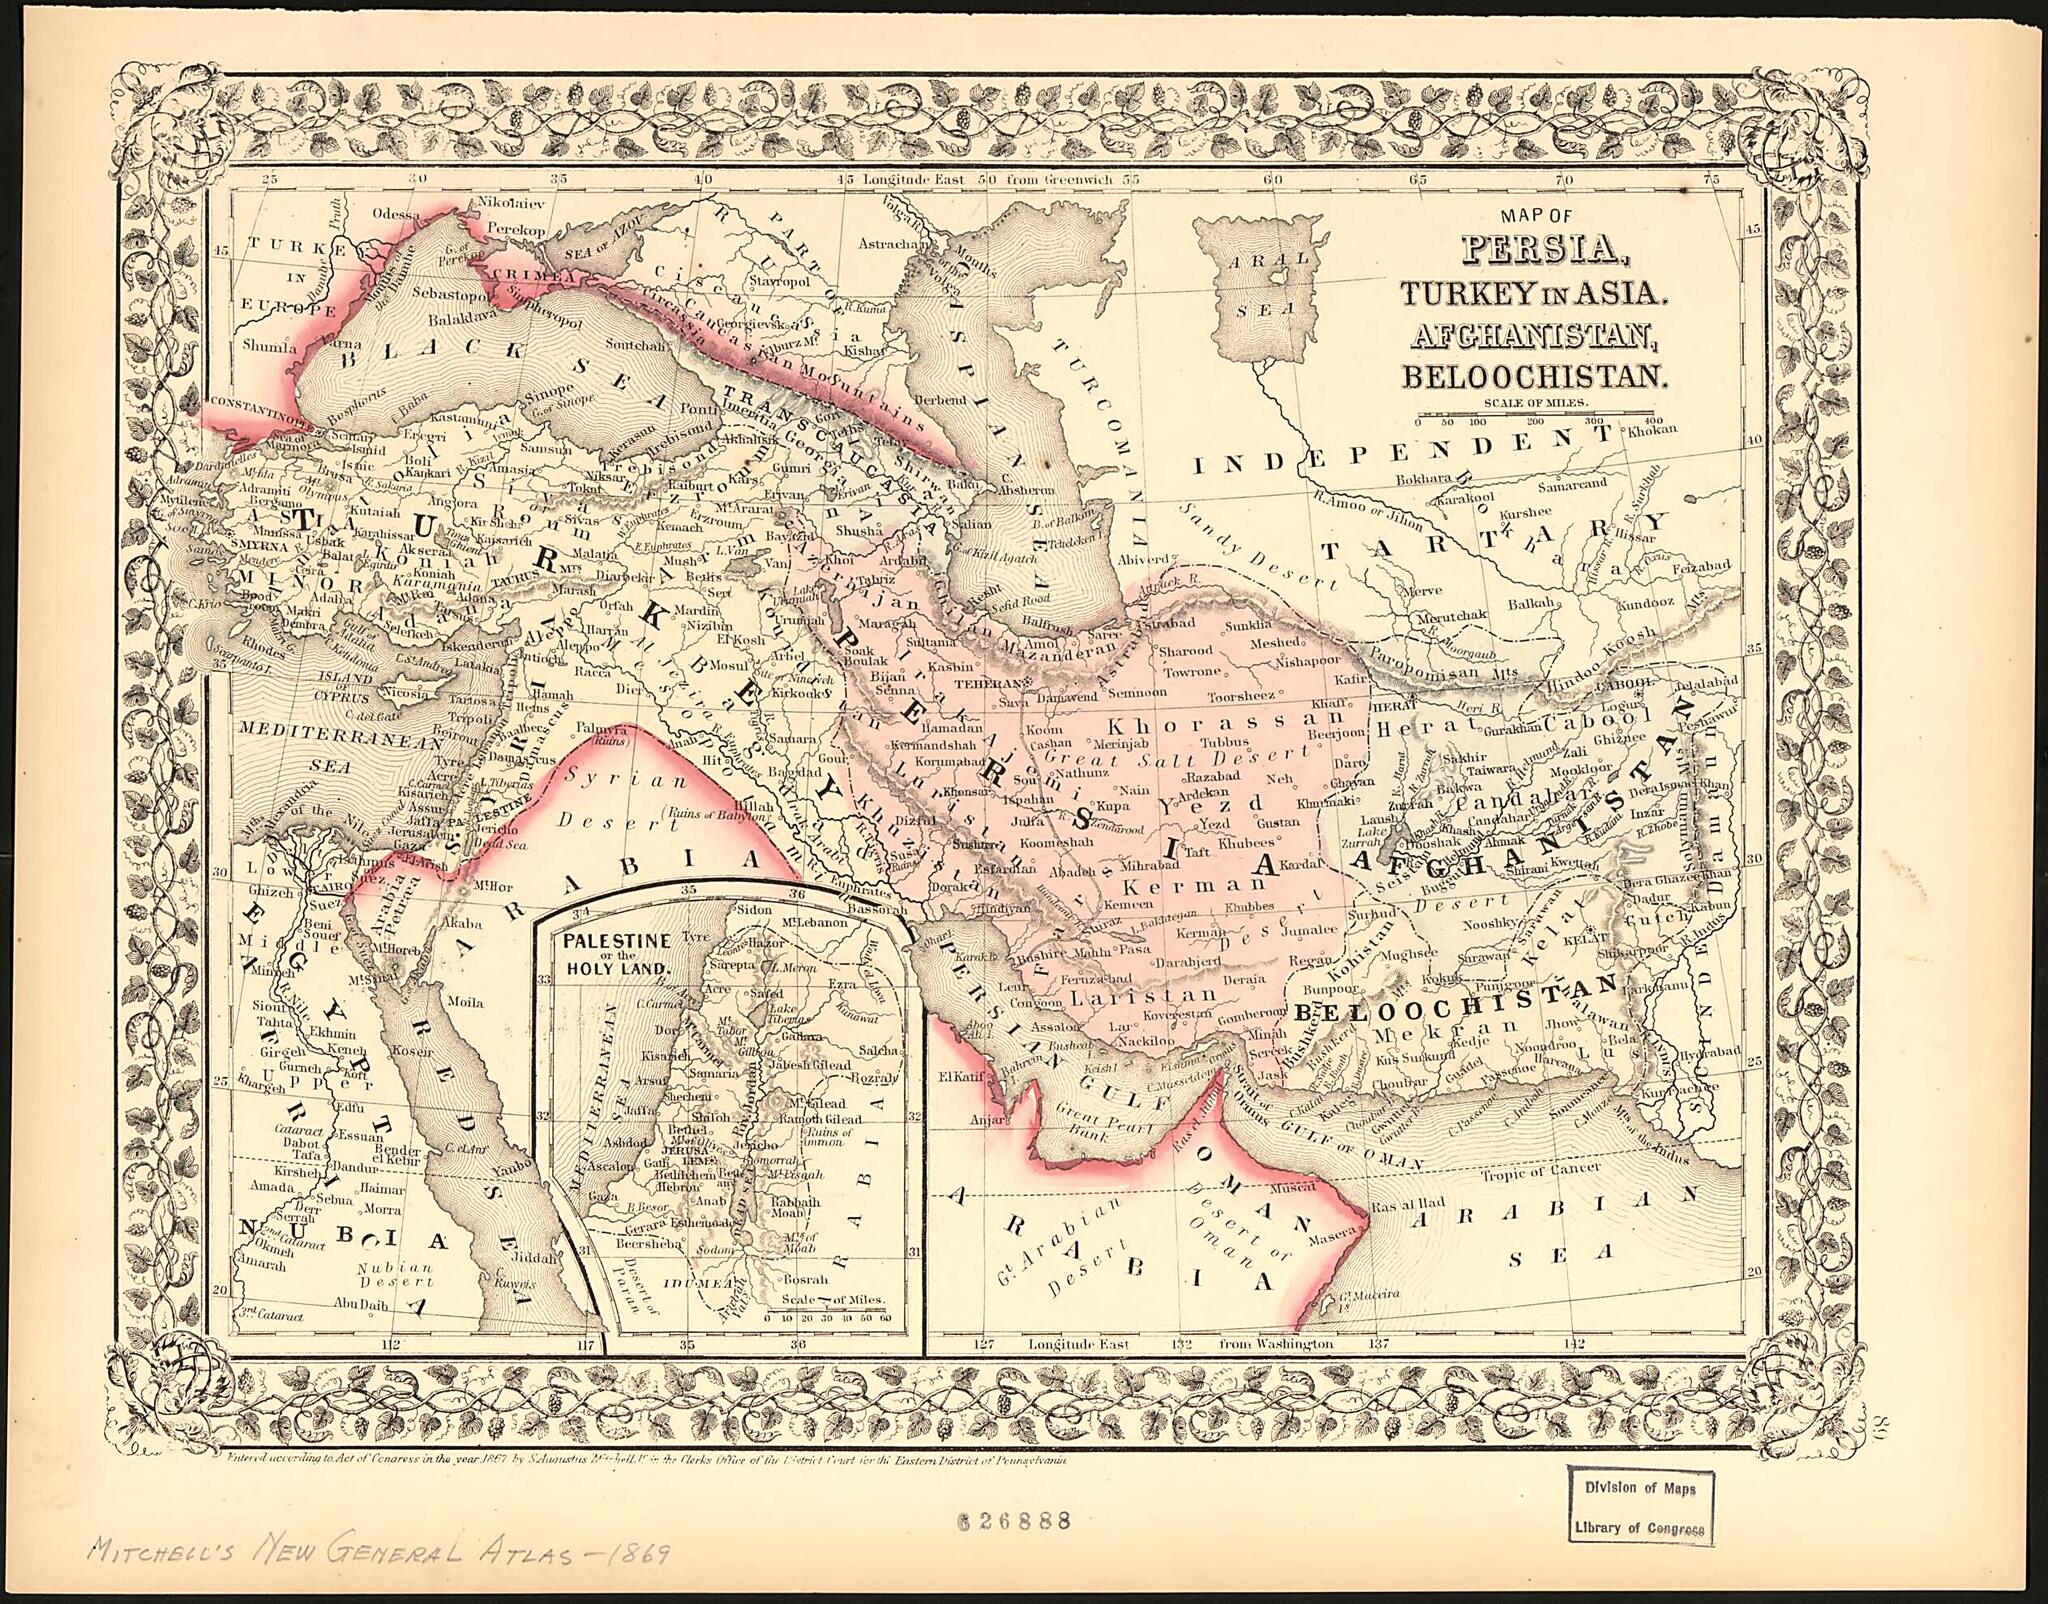 This old map of Map of Persia, Turkey In Asia : Afghanistan, Beloochistan from 1869 was created by S. Augustus Mitchell in 1869